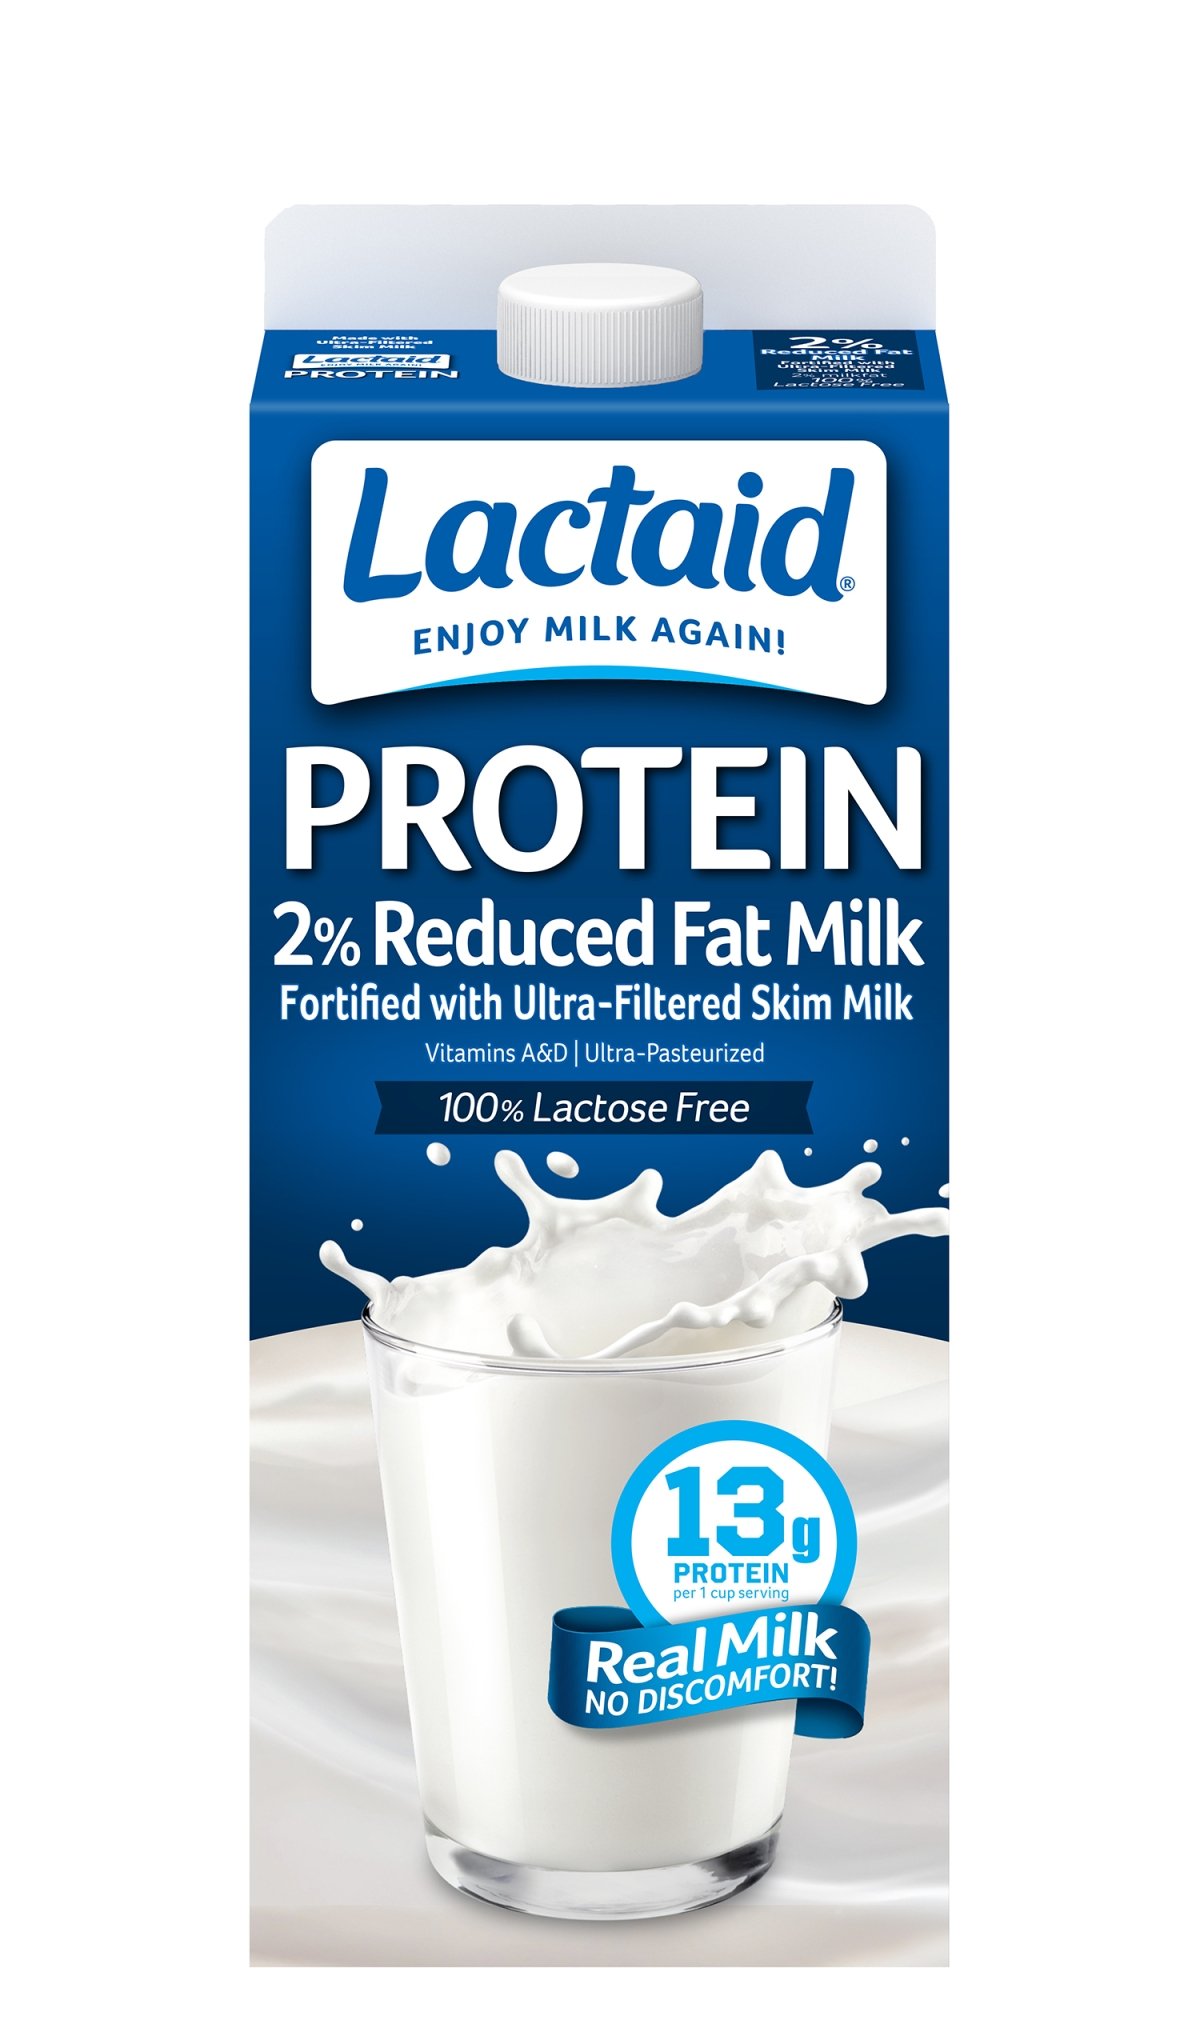 Lactaid 2% Reduced Fat lactose-free protein milk